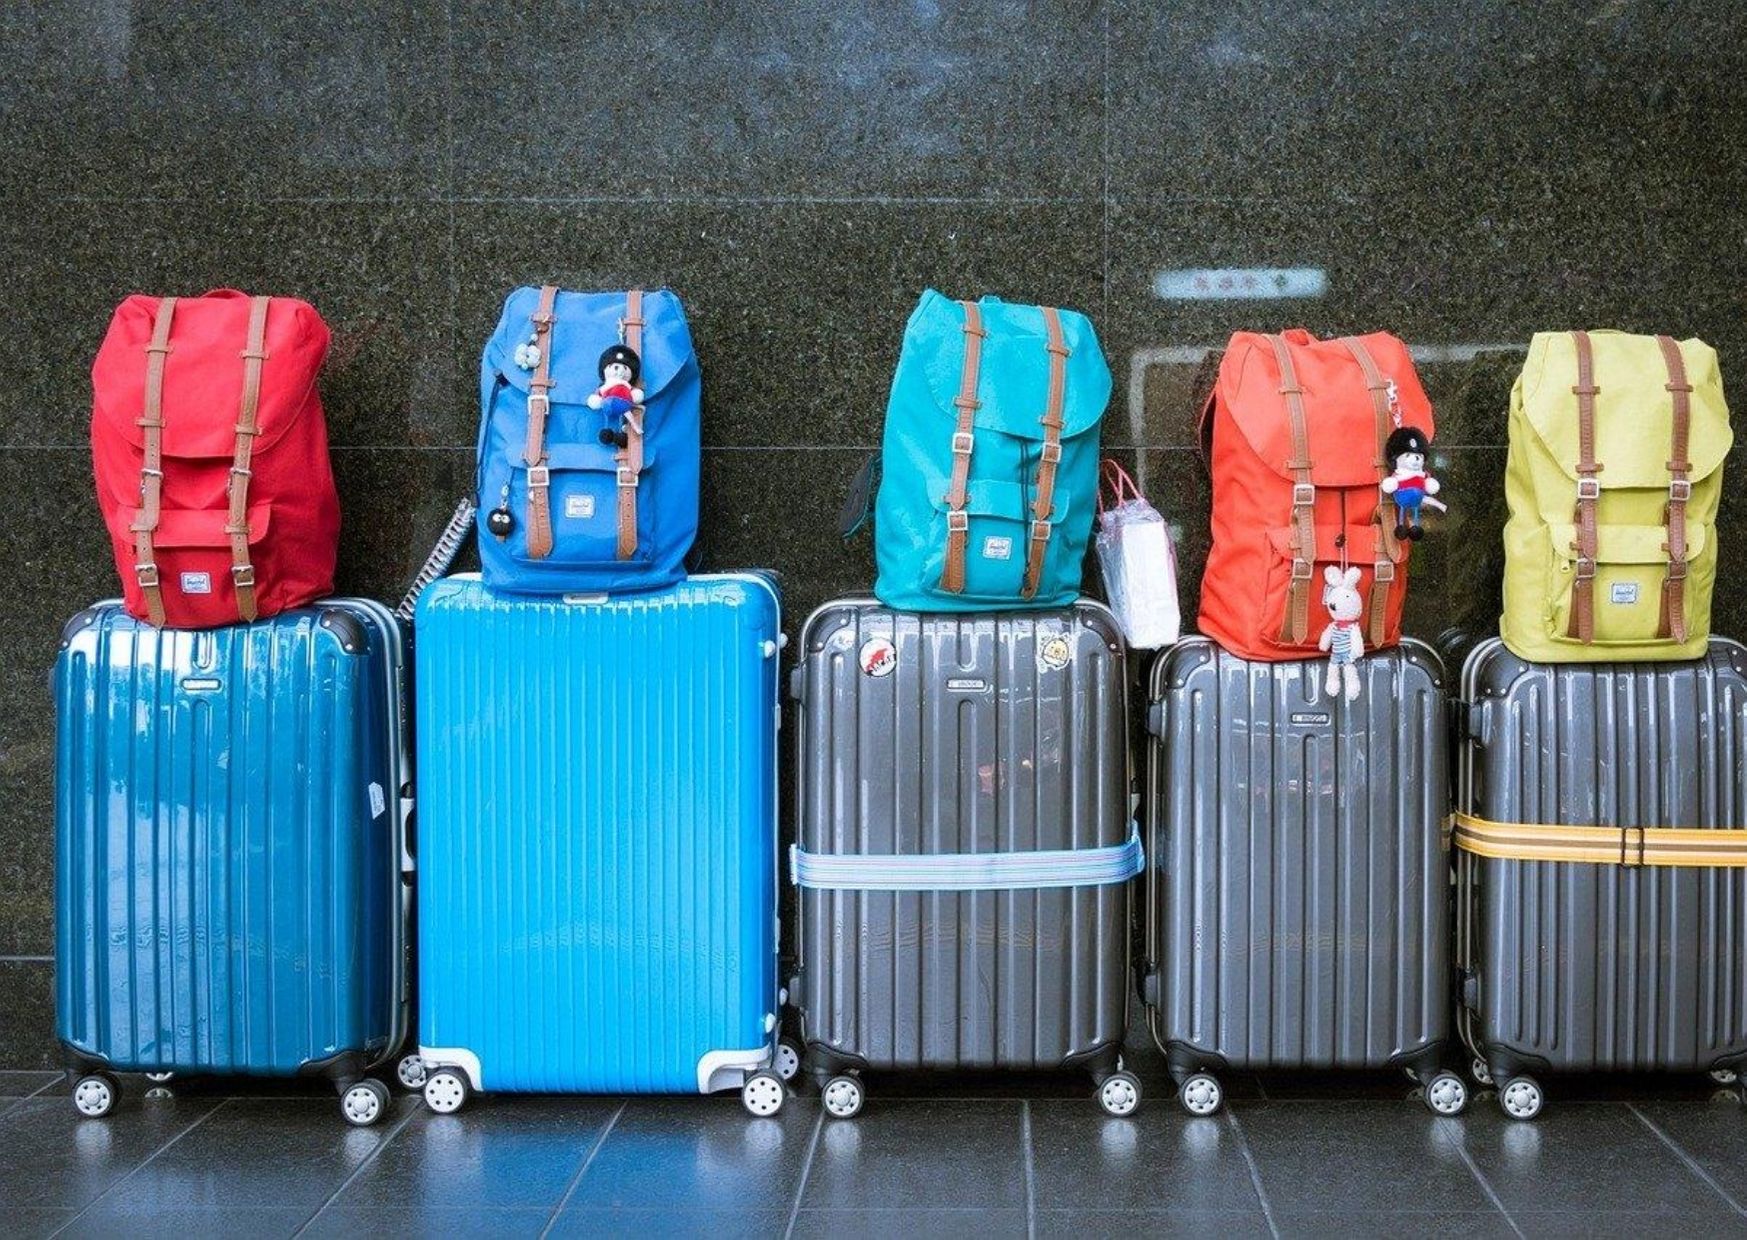 Suitcases in a row